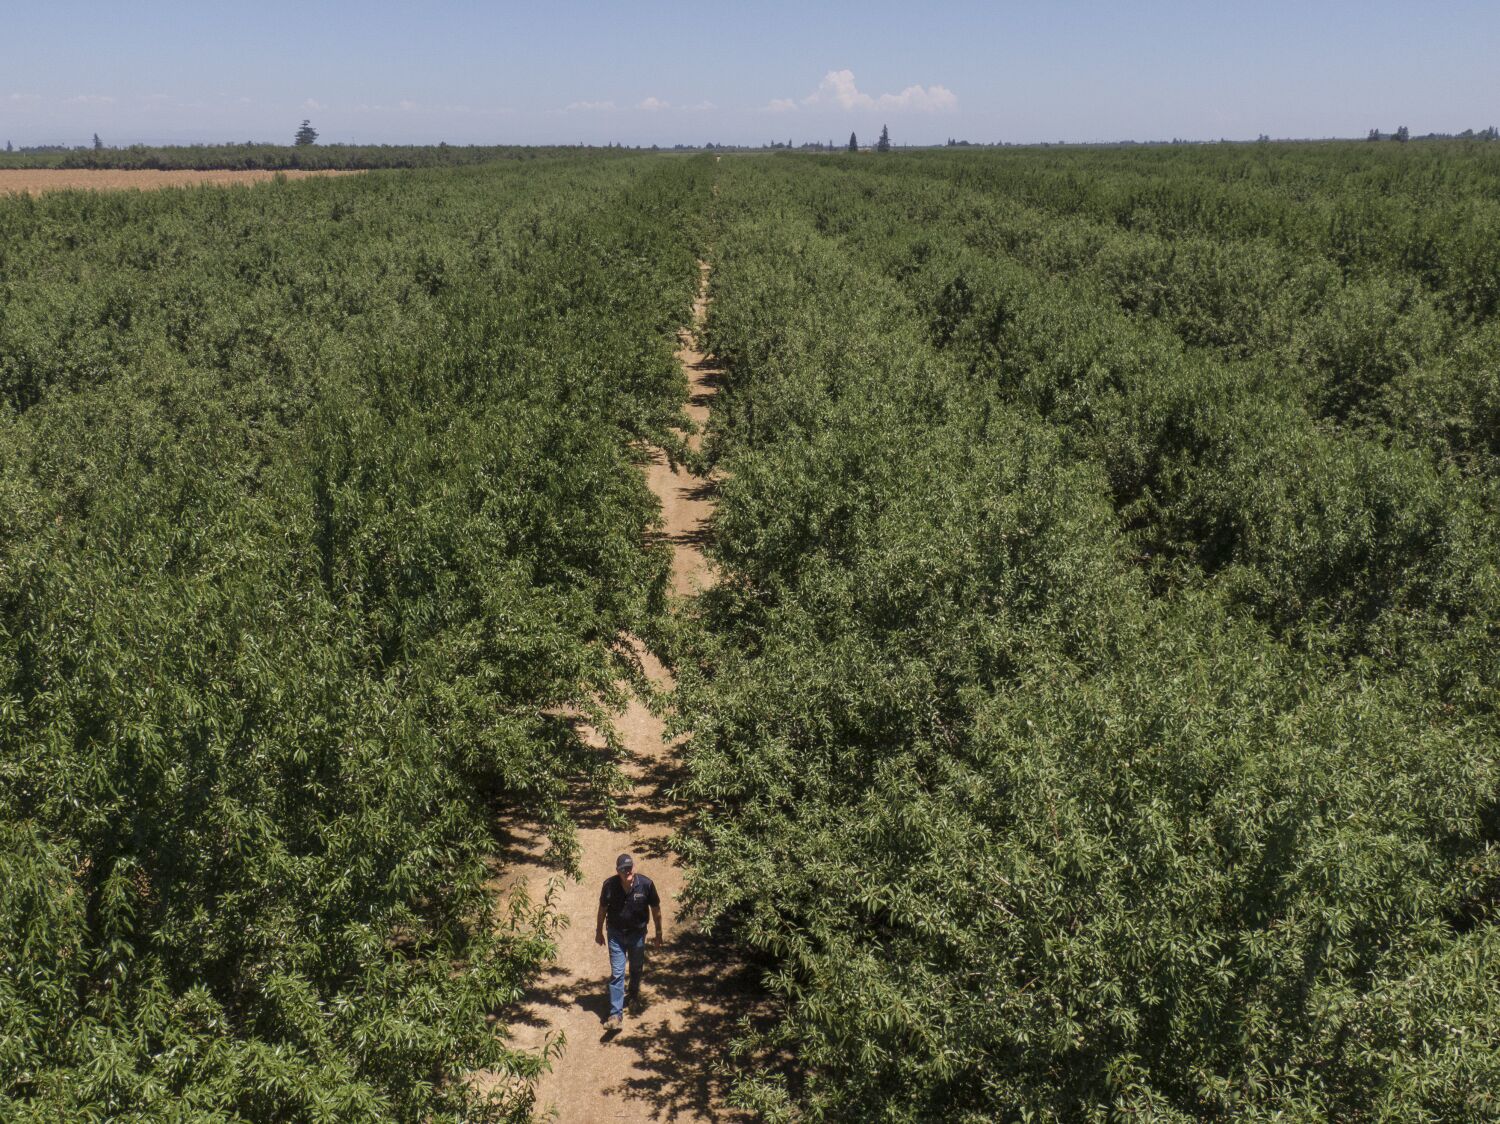 Environmental group urges California to limit the growing of almonds and alfalfa